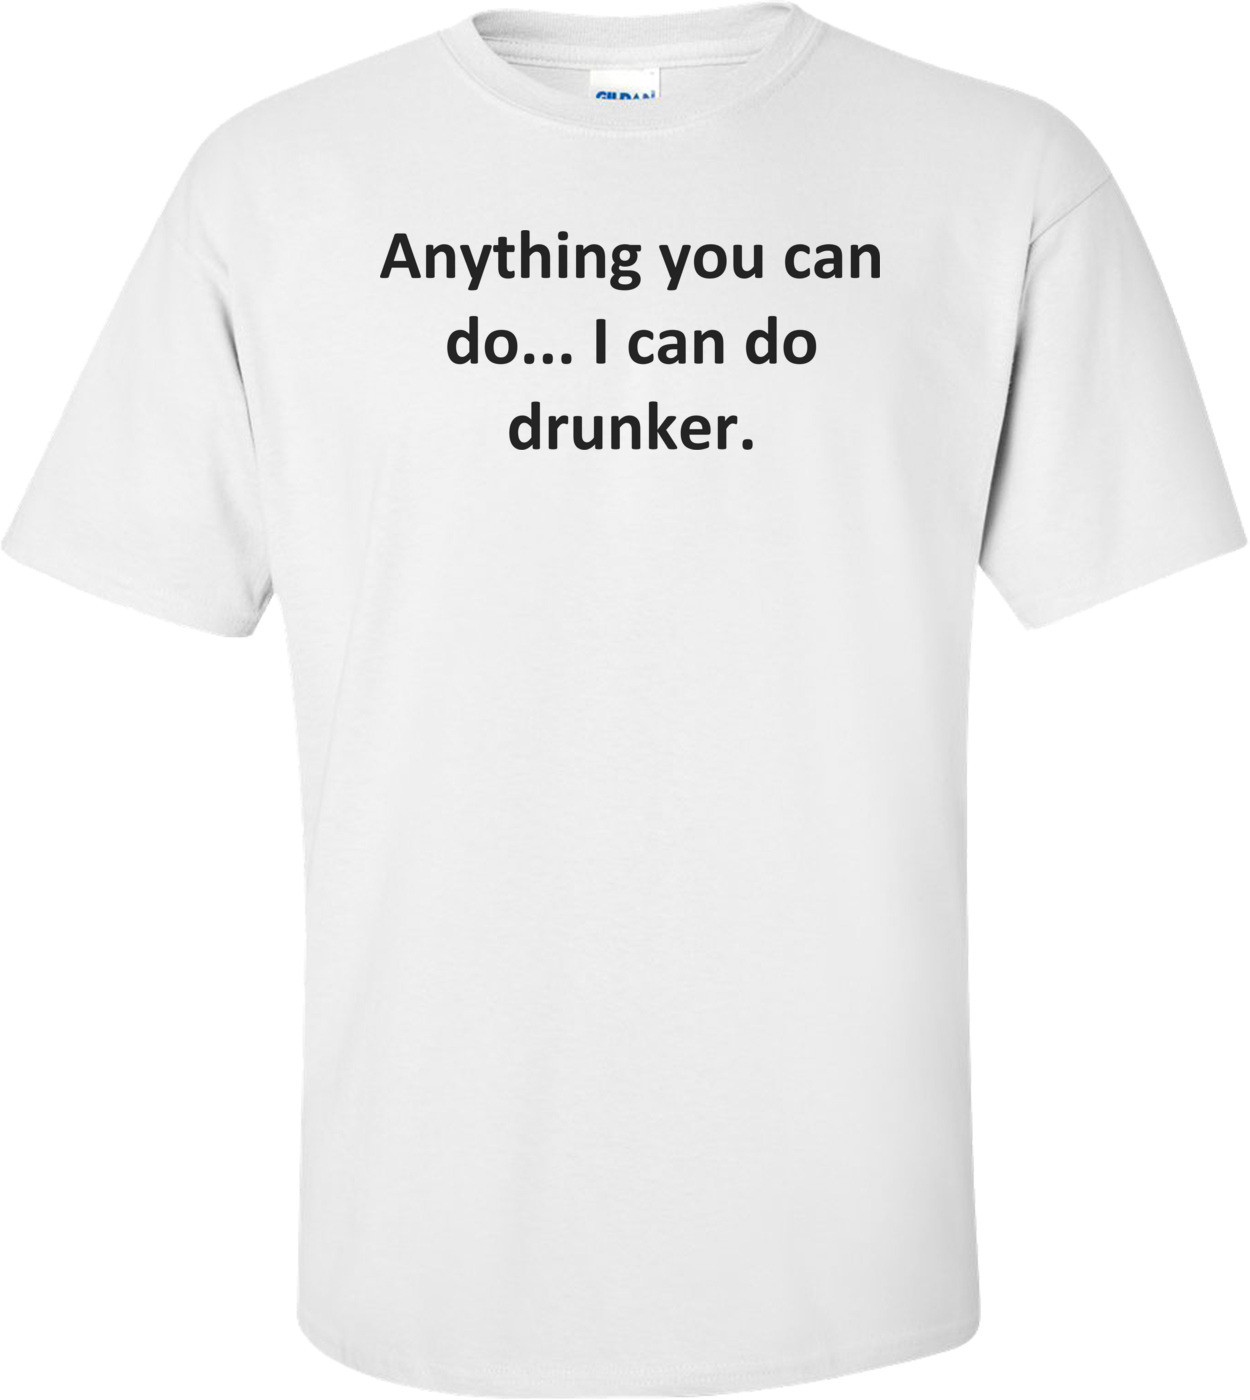 Anything you can do... I can do drunker.